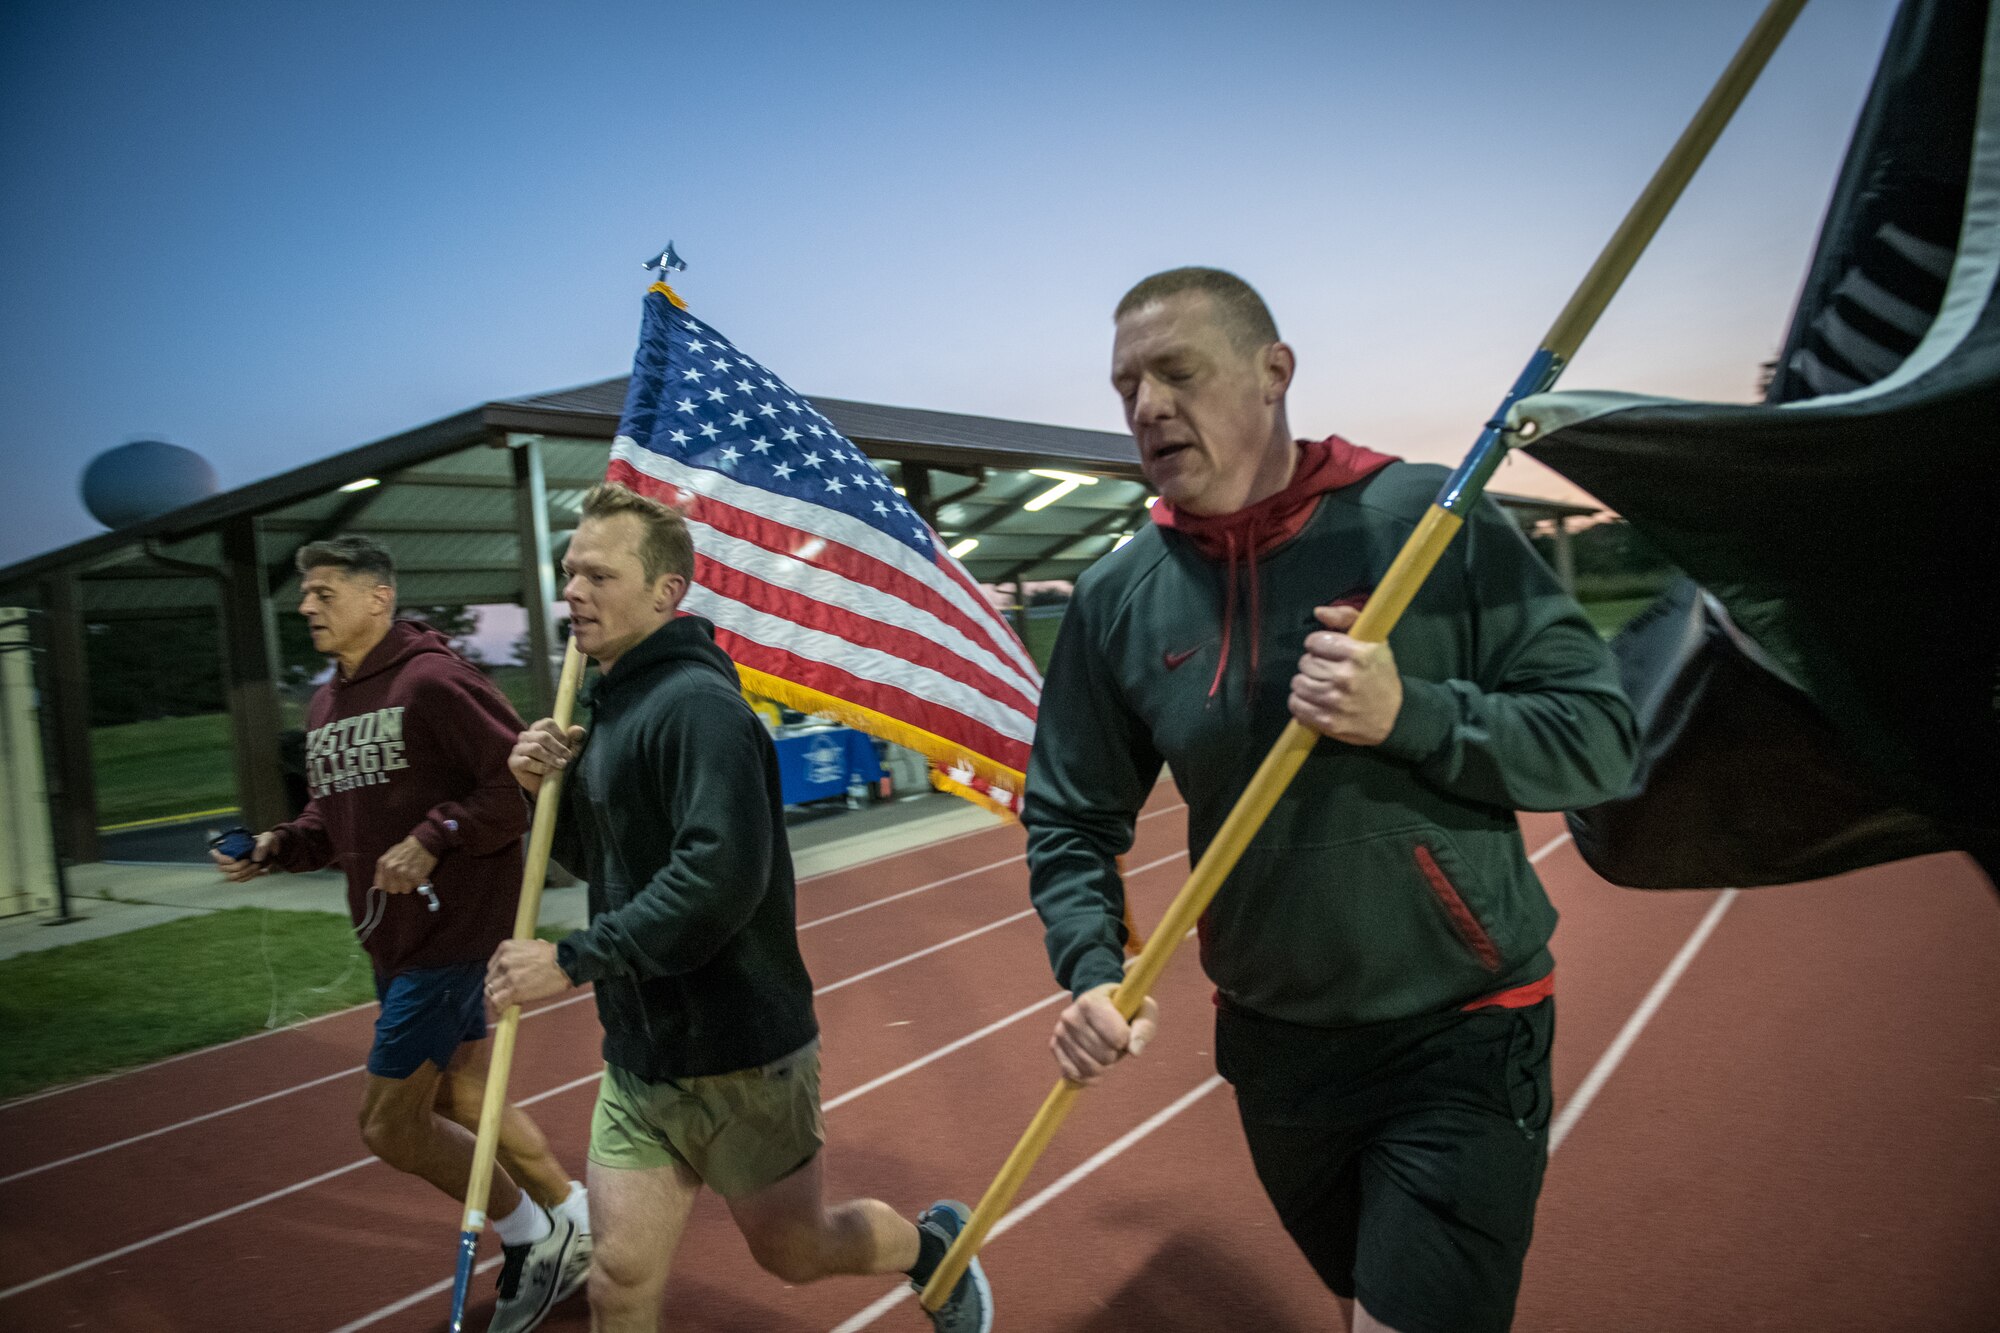 Citizen Airmen from the 932nd Airlift Wing honor U.S. military prisoners of war and those missing in action during the 11th Annual POW/MIA Vigil Run at the James Gym track, Scott Air Force Base, Illinois,  September 19, 2020.  The run was hosted by the Air Force Sergeants Association with the USO on site offering hot beverages and food.  This year's event had the extra COVID-19 precautions with maintaining smaller groups safely spaced while moving the flags around the track. (U.S. Air Force photo by Master Sgt. Christopher Parr)